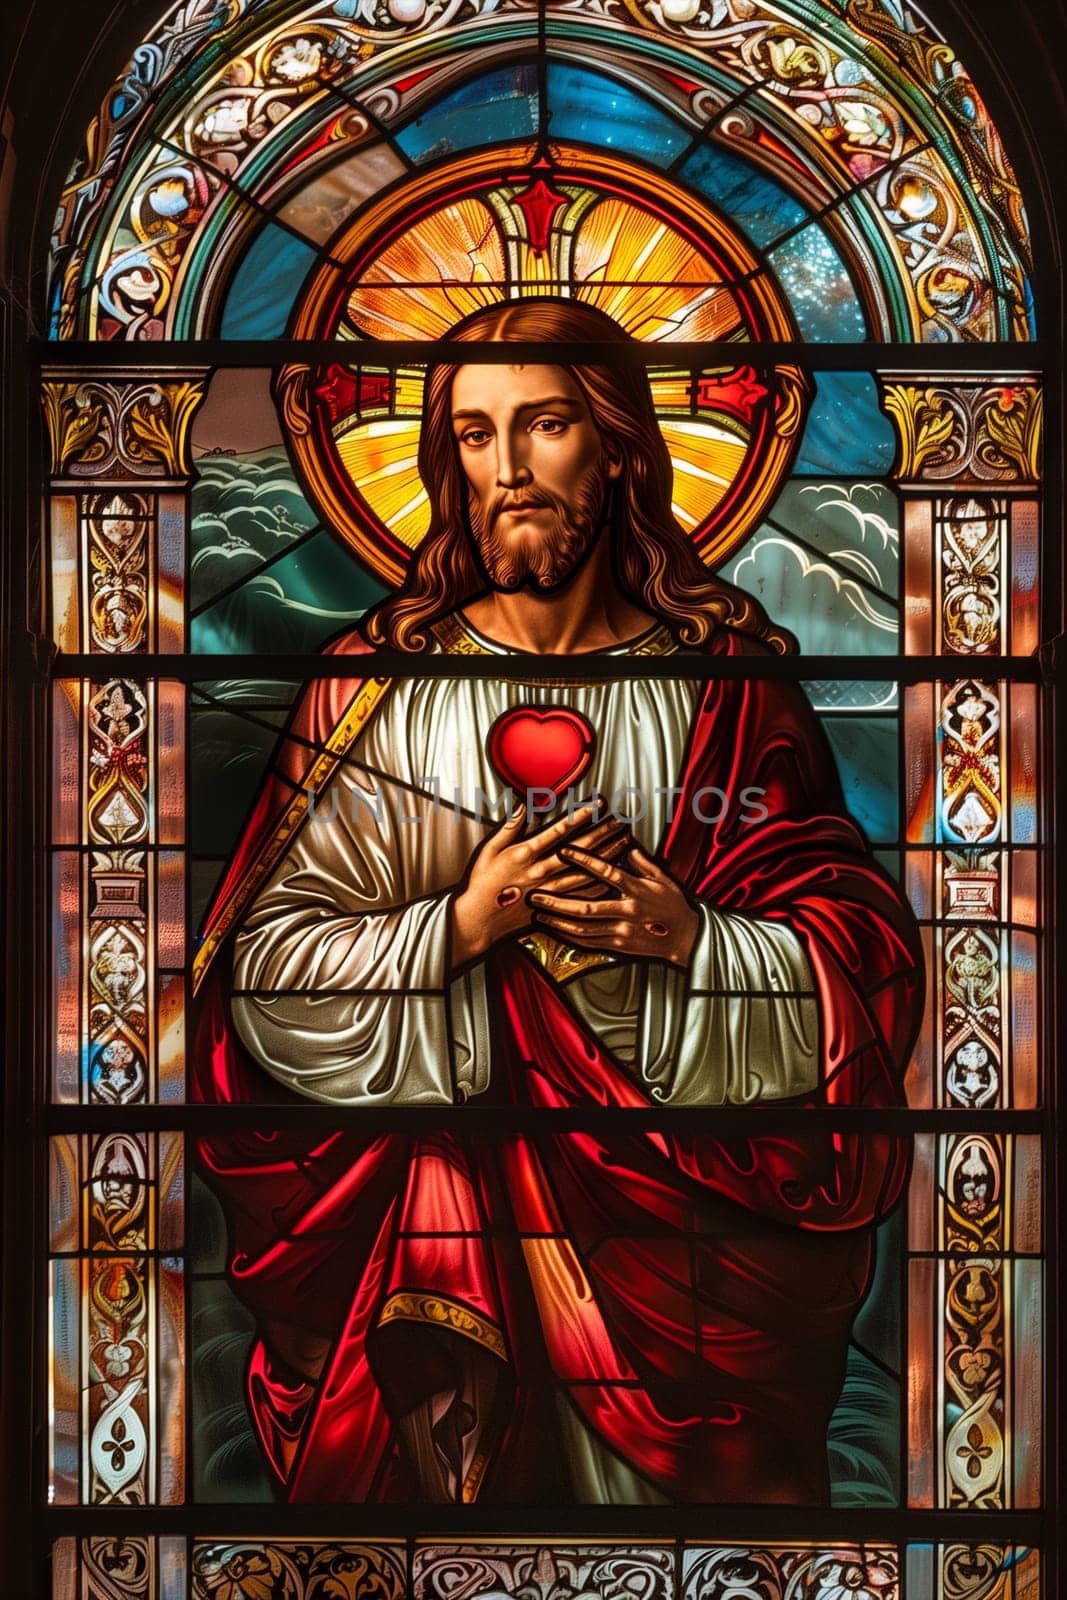 A vibrant stained glass window depicting the Heart of Jesus in a church, illuminating the interior with colorful light.